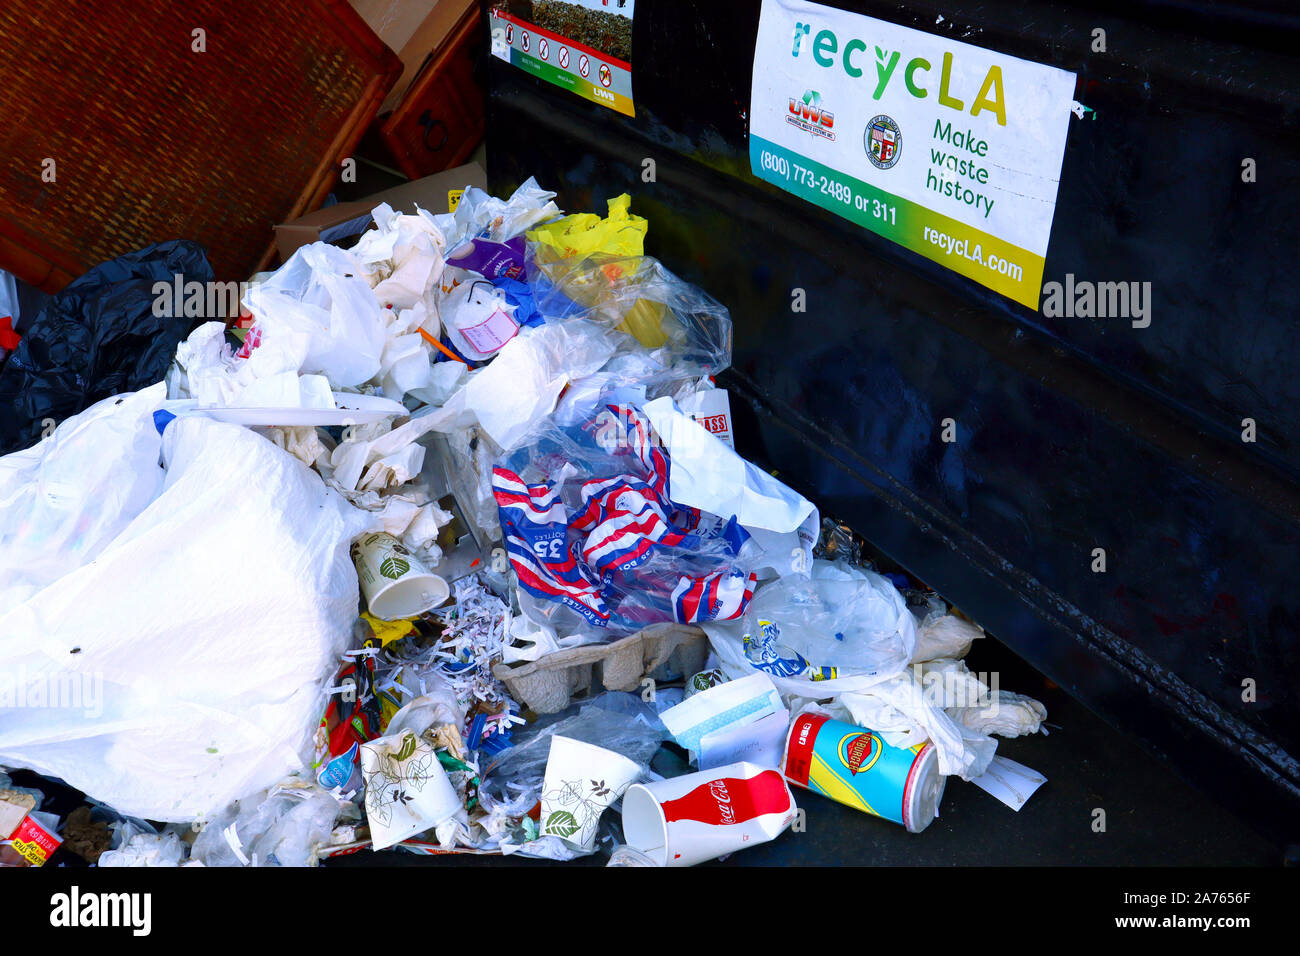 recycLA UWS Universal Waste Systems Inc. Container with garbage on the street in Los Angeles Stock Photo